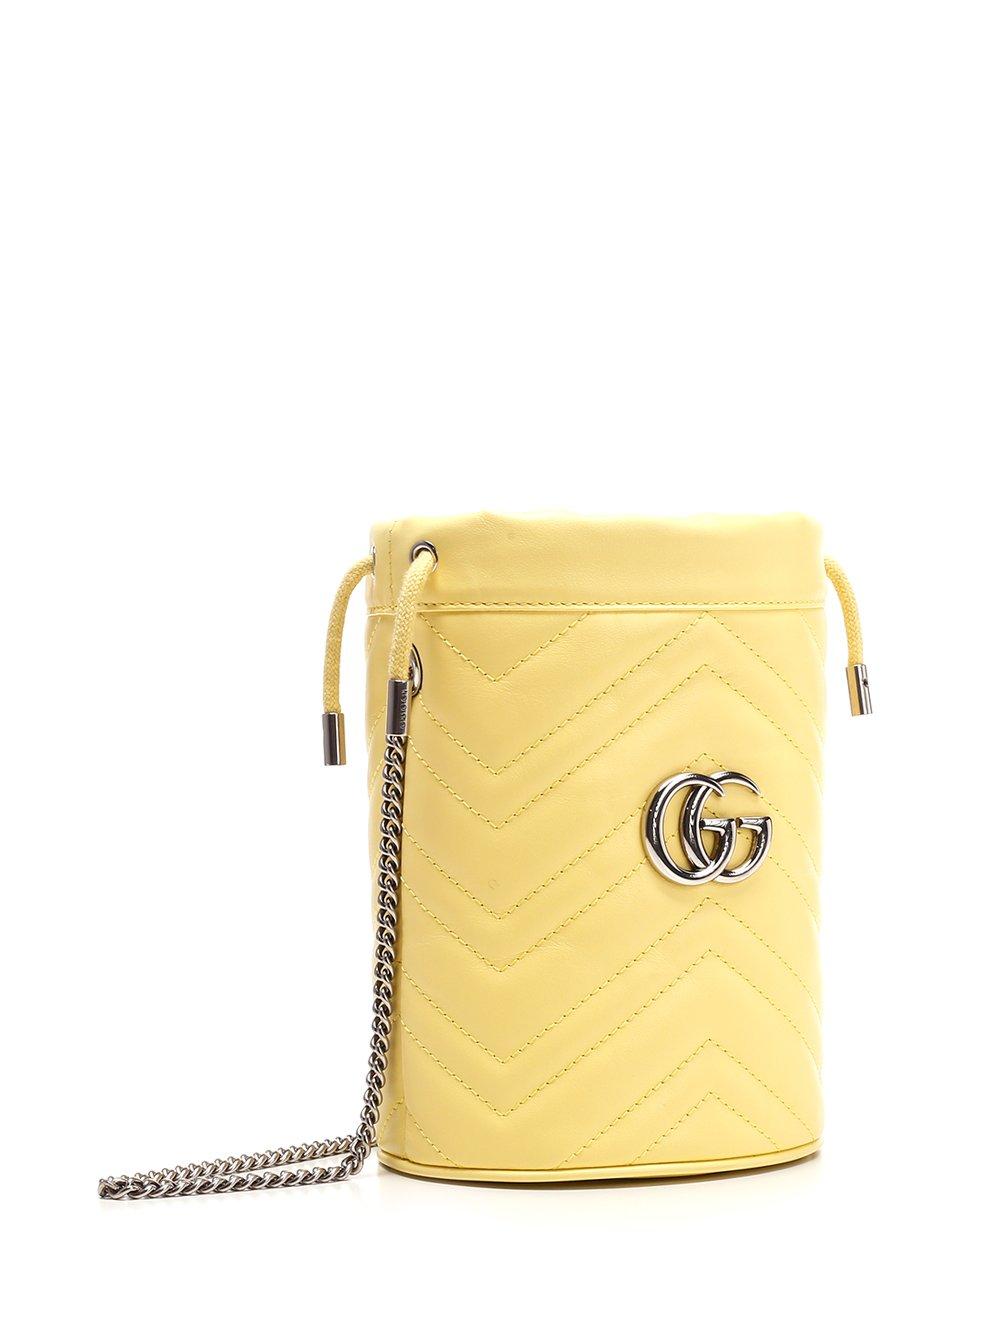 Gucci Marmont Shoulder Bag GG Small Pastel Yellow in Matelasse